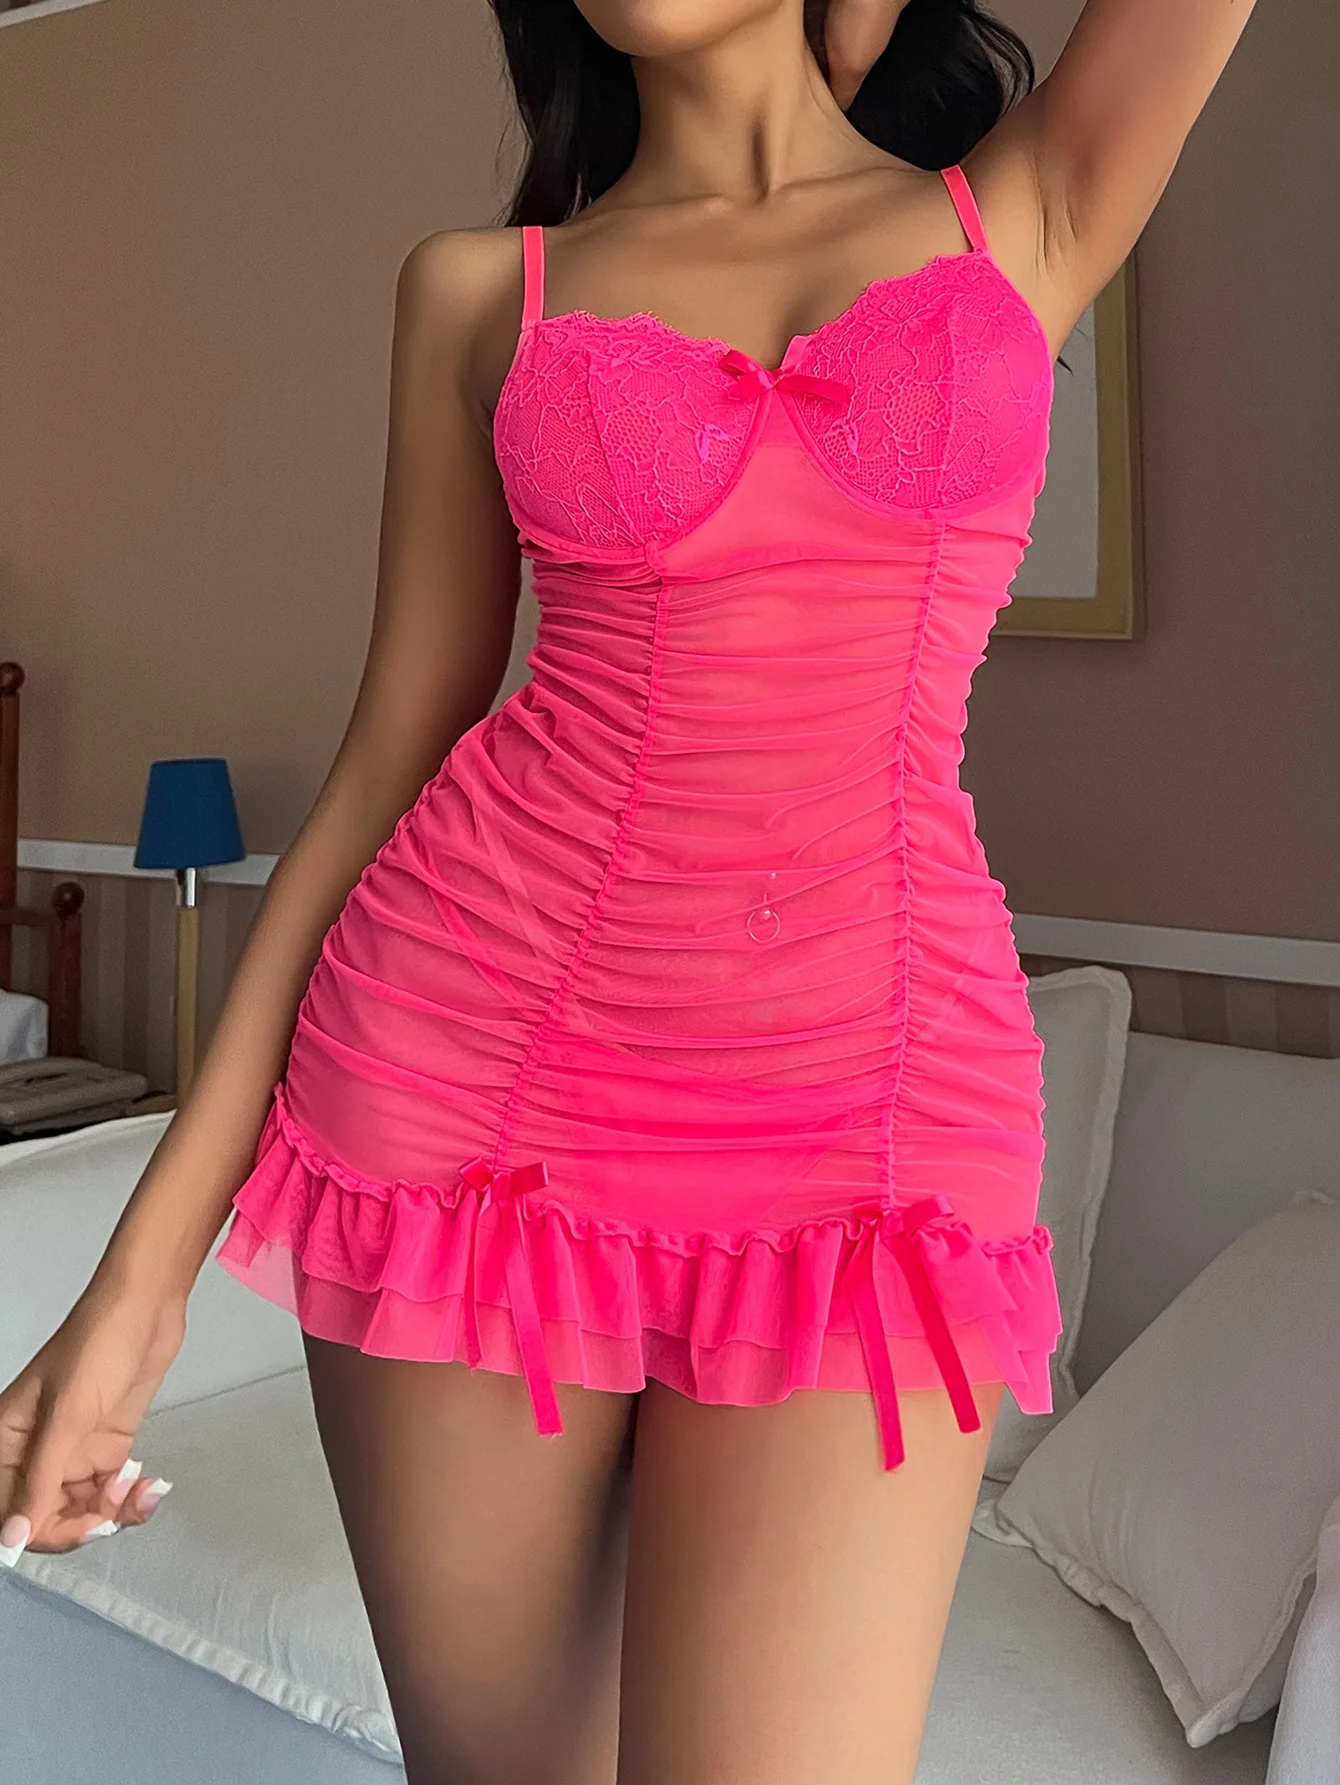 

Sensual Pleated Nightdress Transparent Ruffled Mini Dress Sheer Lace Babydoll See Through Fantasy Sexy Porn Outfit